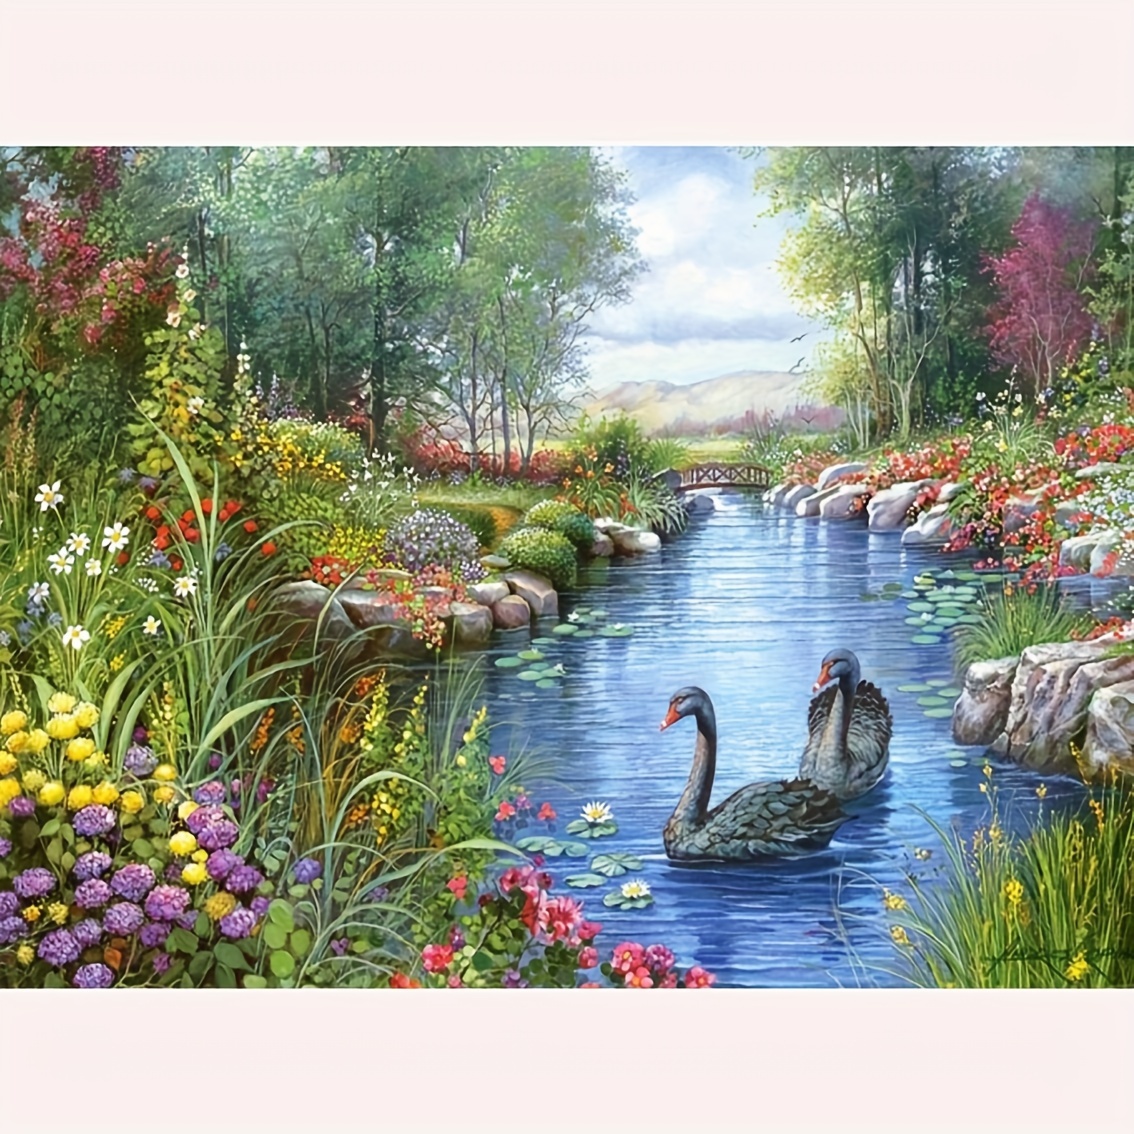 

Black Swan 5d Diy Diamond Painting Kit - Full Round Drill, Frameless Rhinestone Embroidery Set For Home & Wall Decor, Perfect Gift For Beginners, Craft Supplies Included, 11.8x15.7 Inches